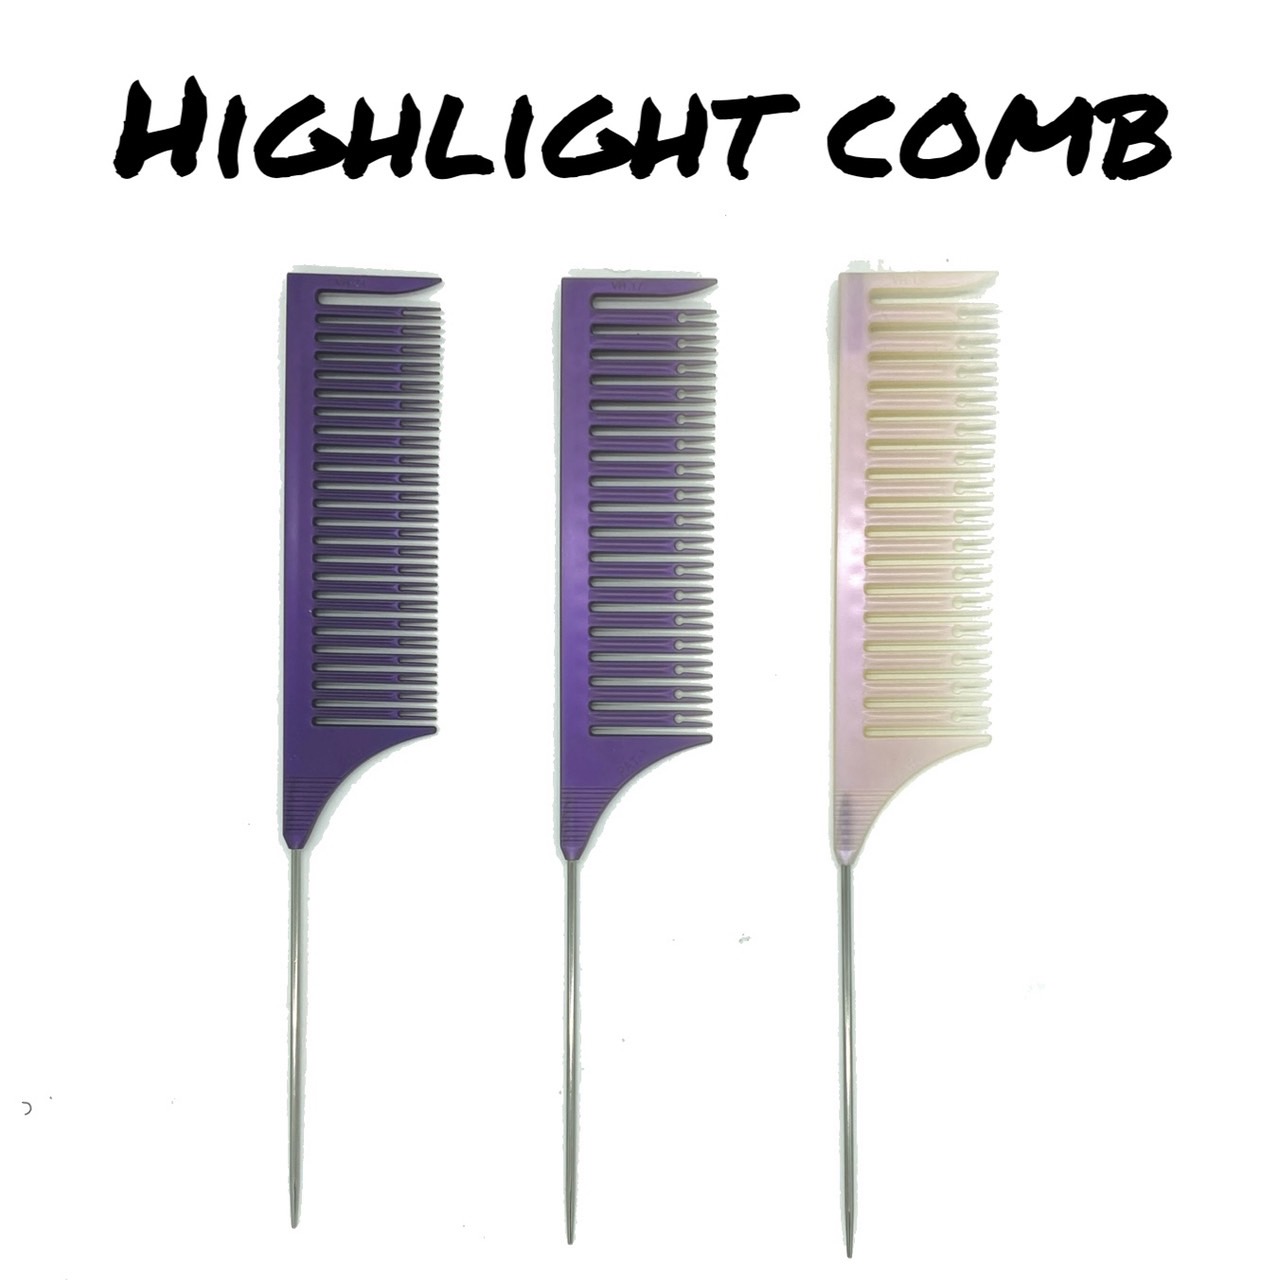 HIGHLIGHT　COMB３本セット